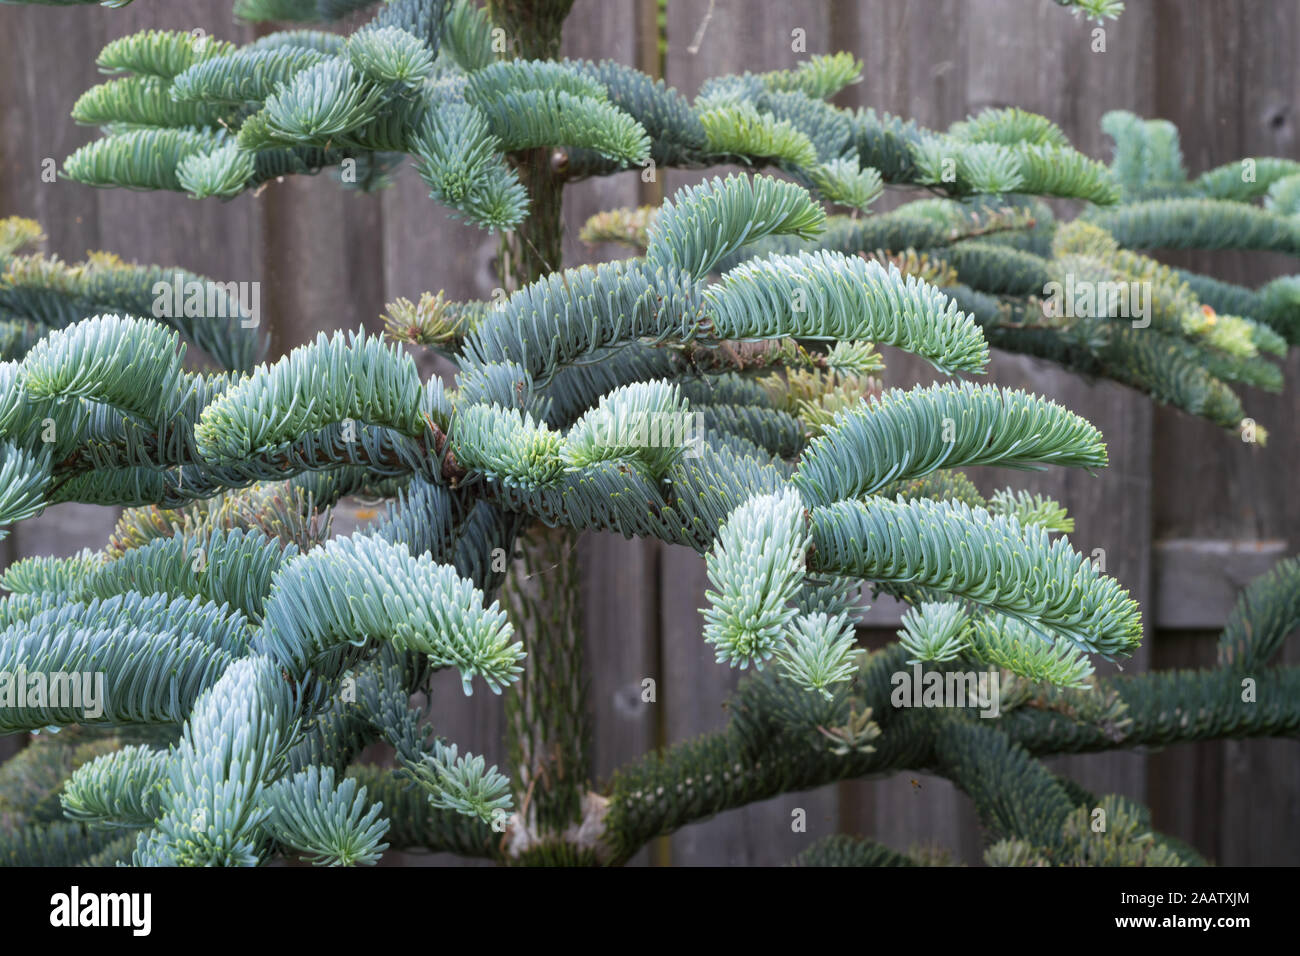 Branches of young Noble fir (Abies procera) in a botanical garden in spring. Beautiful soft needles with a blue silver color. Stock Photo